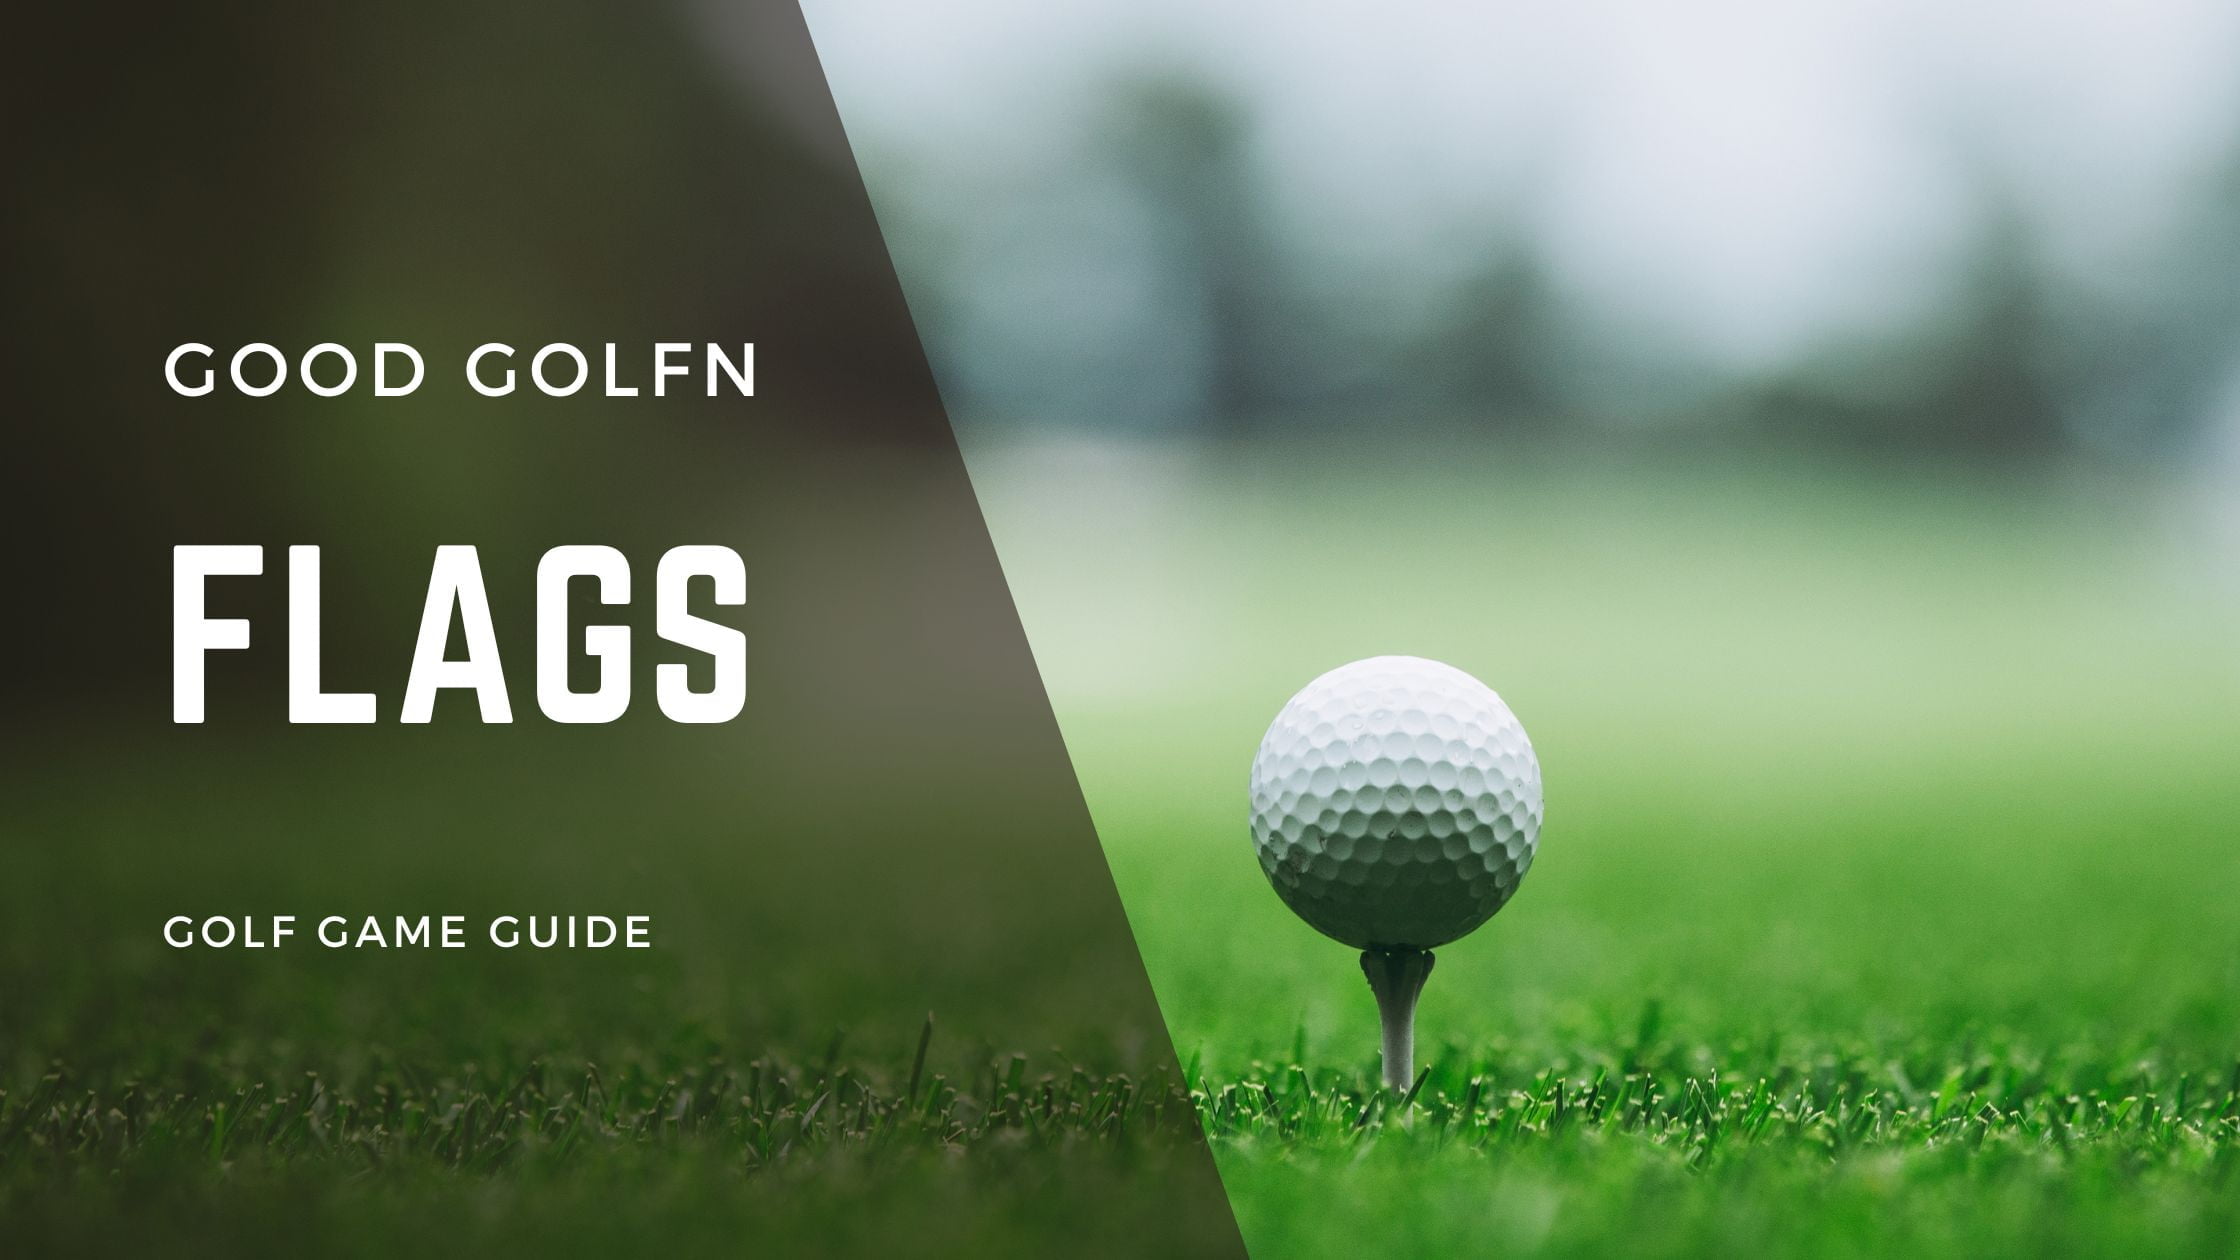 Dive into the intriguing flags golf game, from its rich history to expert tips. Decode flag colors, grasp game rules, and become a master on the golf course.